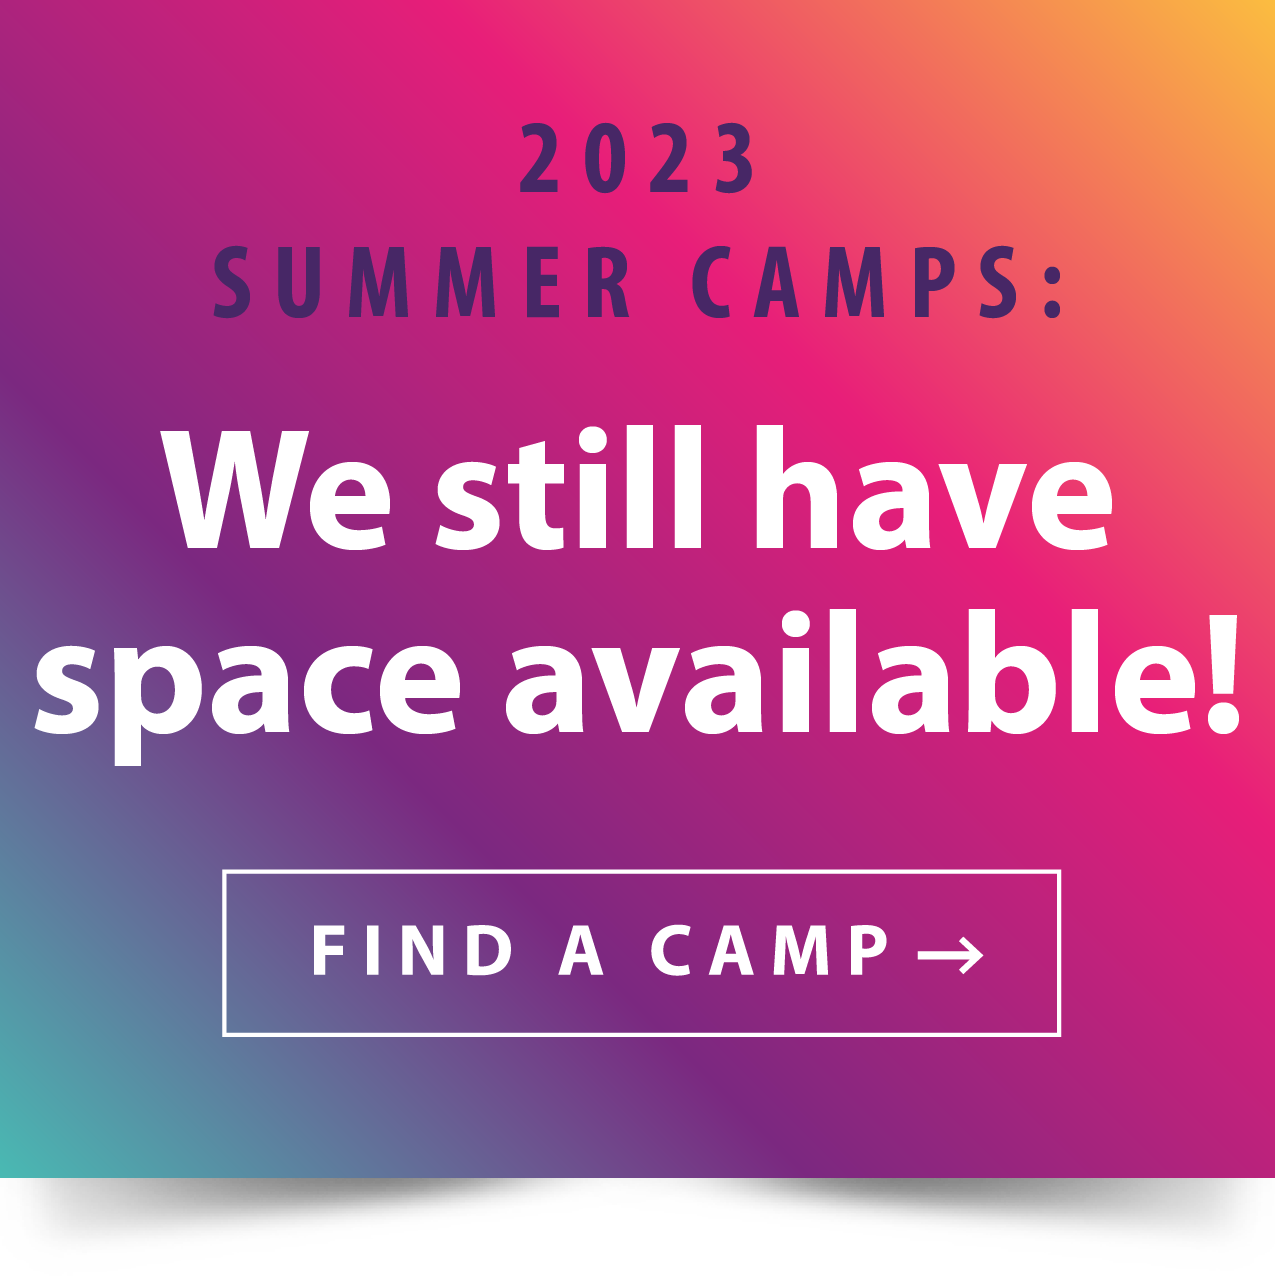 Summer Camps that still have space available!